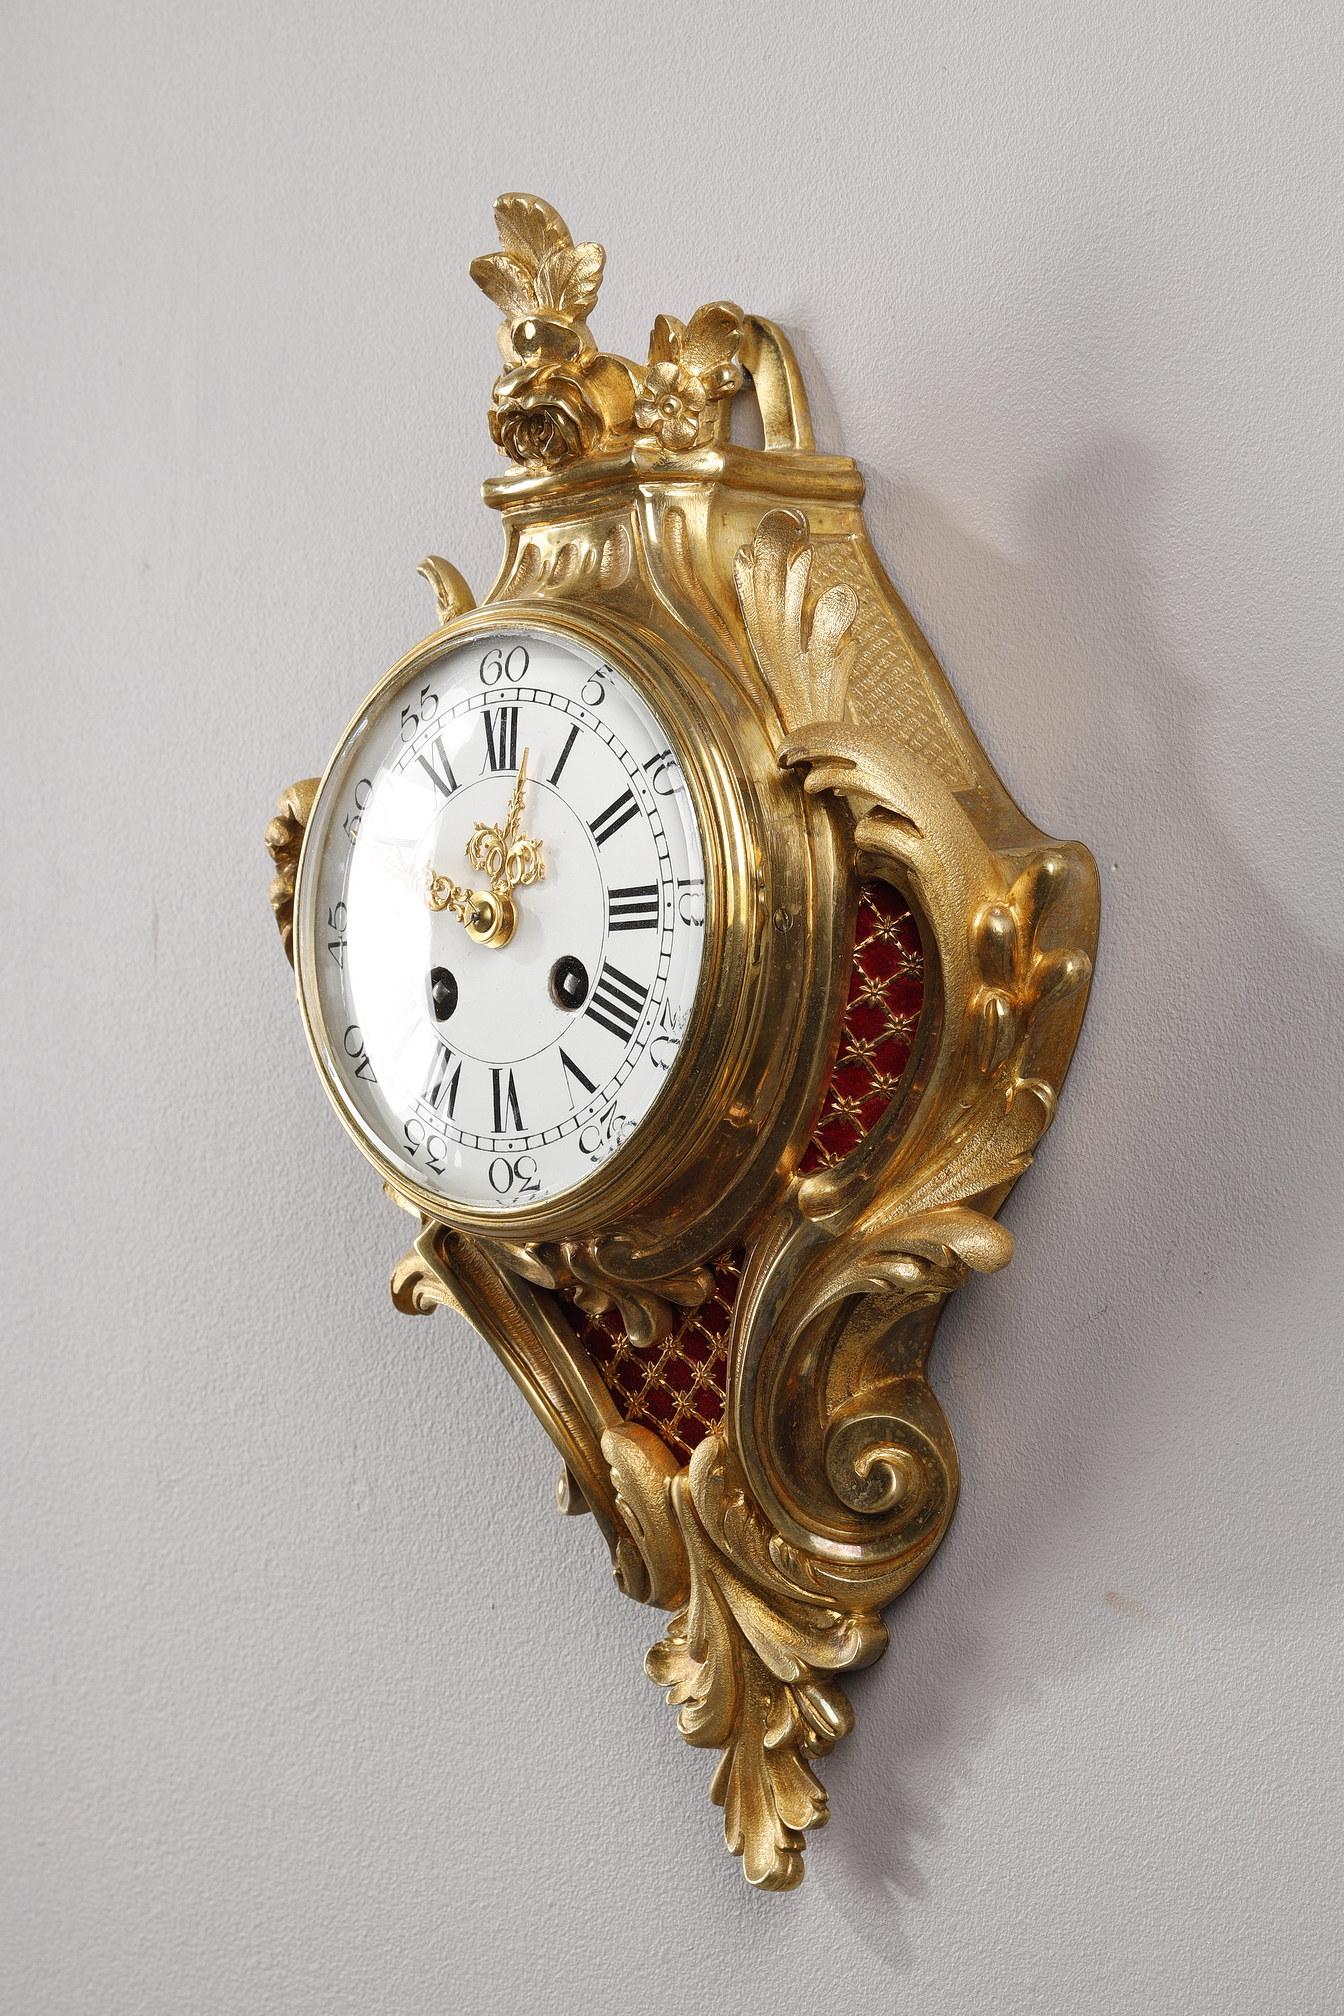 Small gilded bronze cartel. Its rocaille decoration of animated foliage is of Louis XV style. It is adorned with an openwork pattern that uncovers a red velvet fabric. The dial is enamelled with Roman numerals for the hours and Arabic numerals for